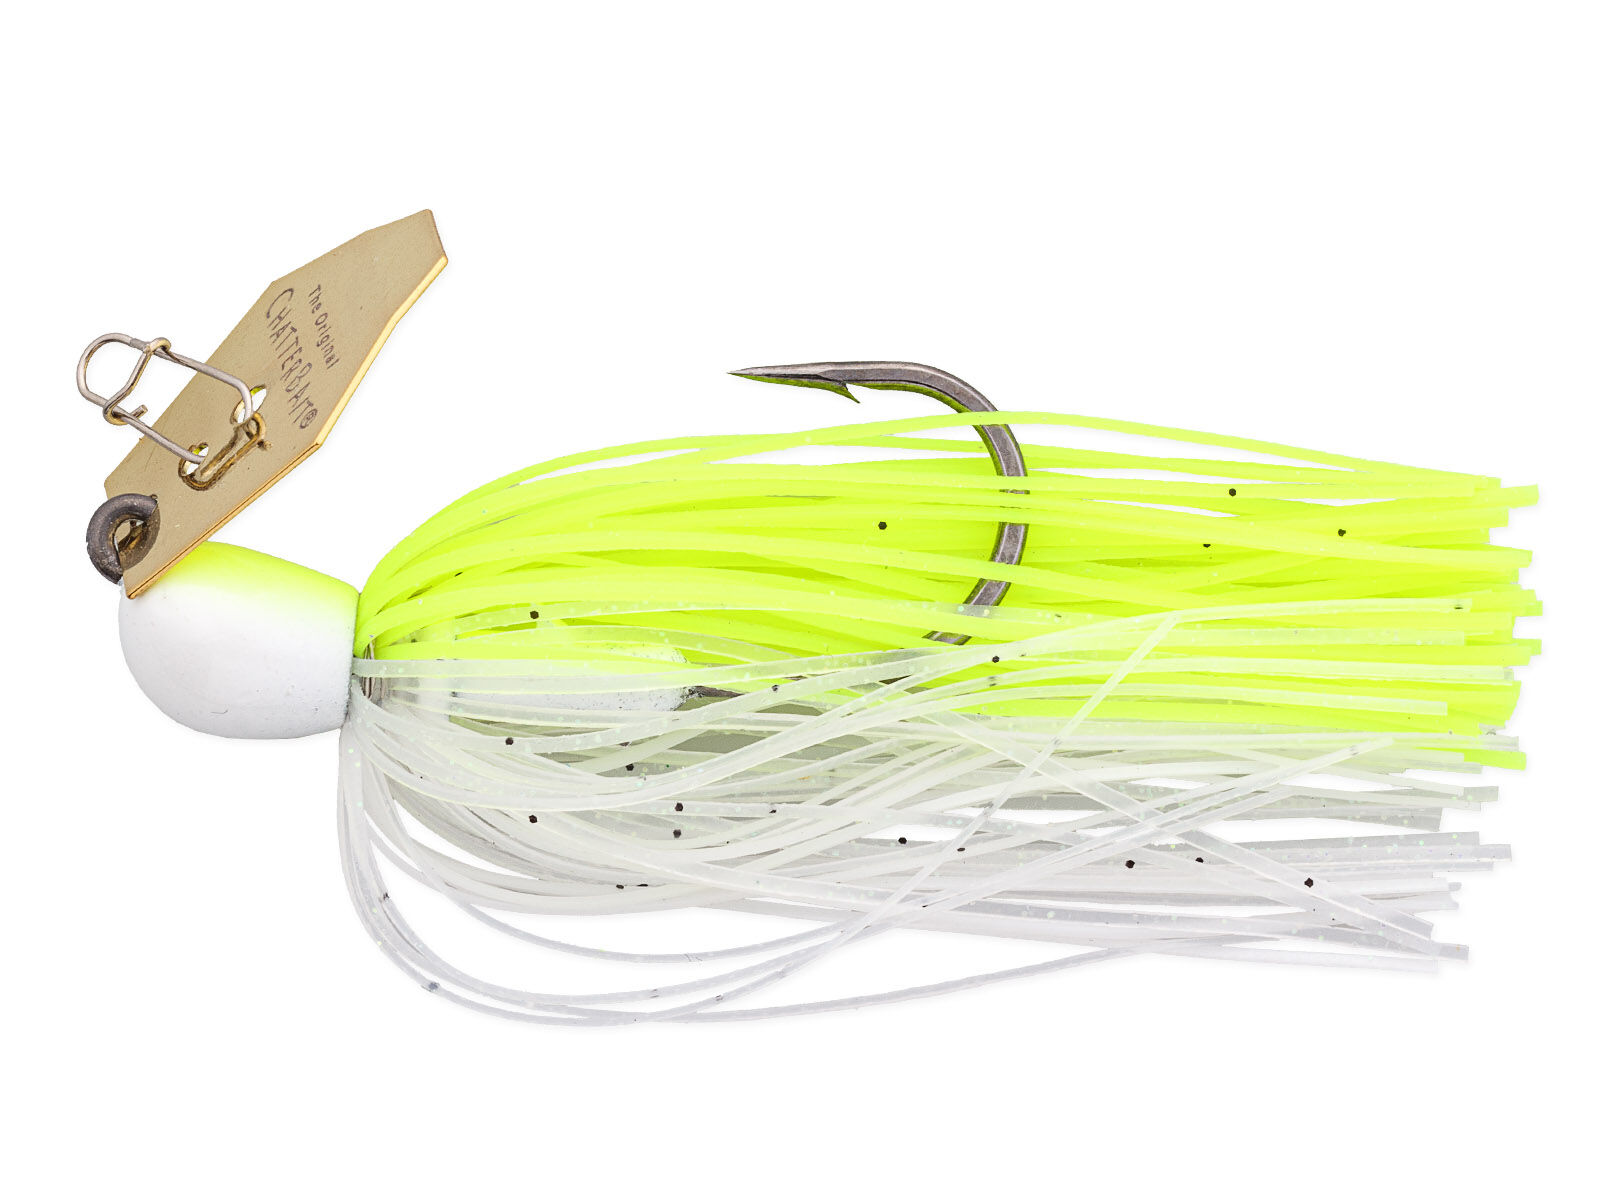 Z-Man Chatterbait Mini Max – Choice of Colors and Sizes – La